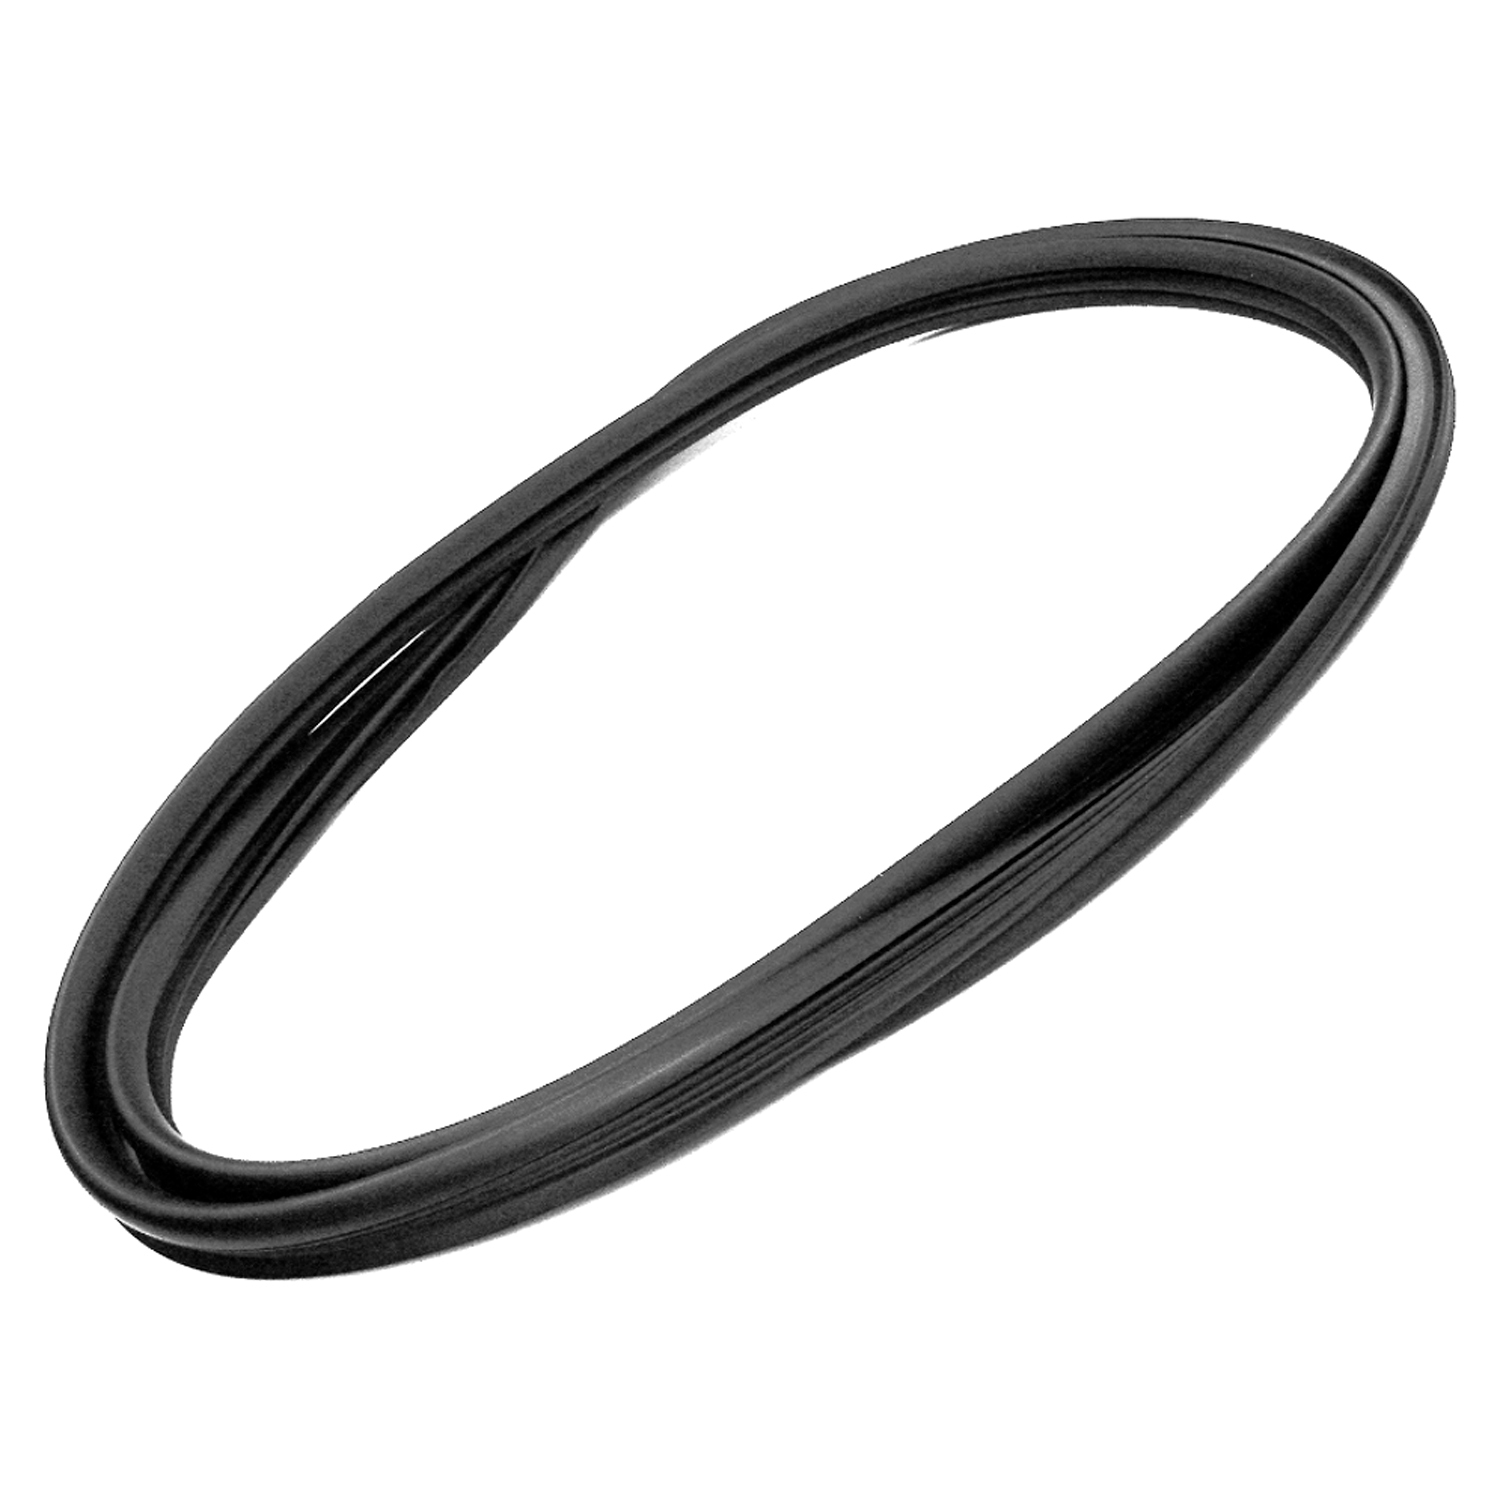 1987 Chevrolet V20 Windshield Seal, 73-87 GM Full Size Truck, 73-91 GM SUV, Without Trim Groove-VWS 7313-D